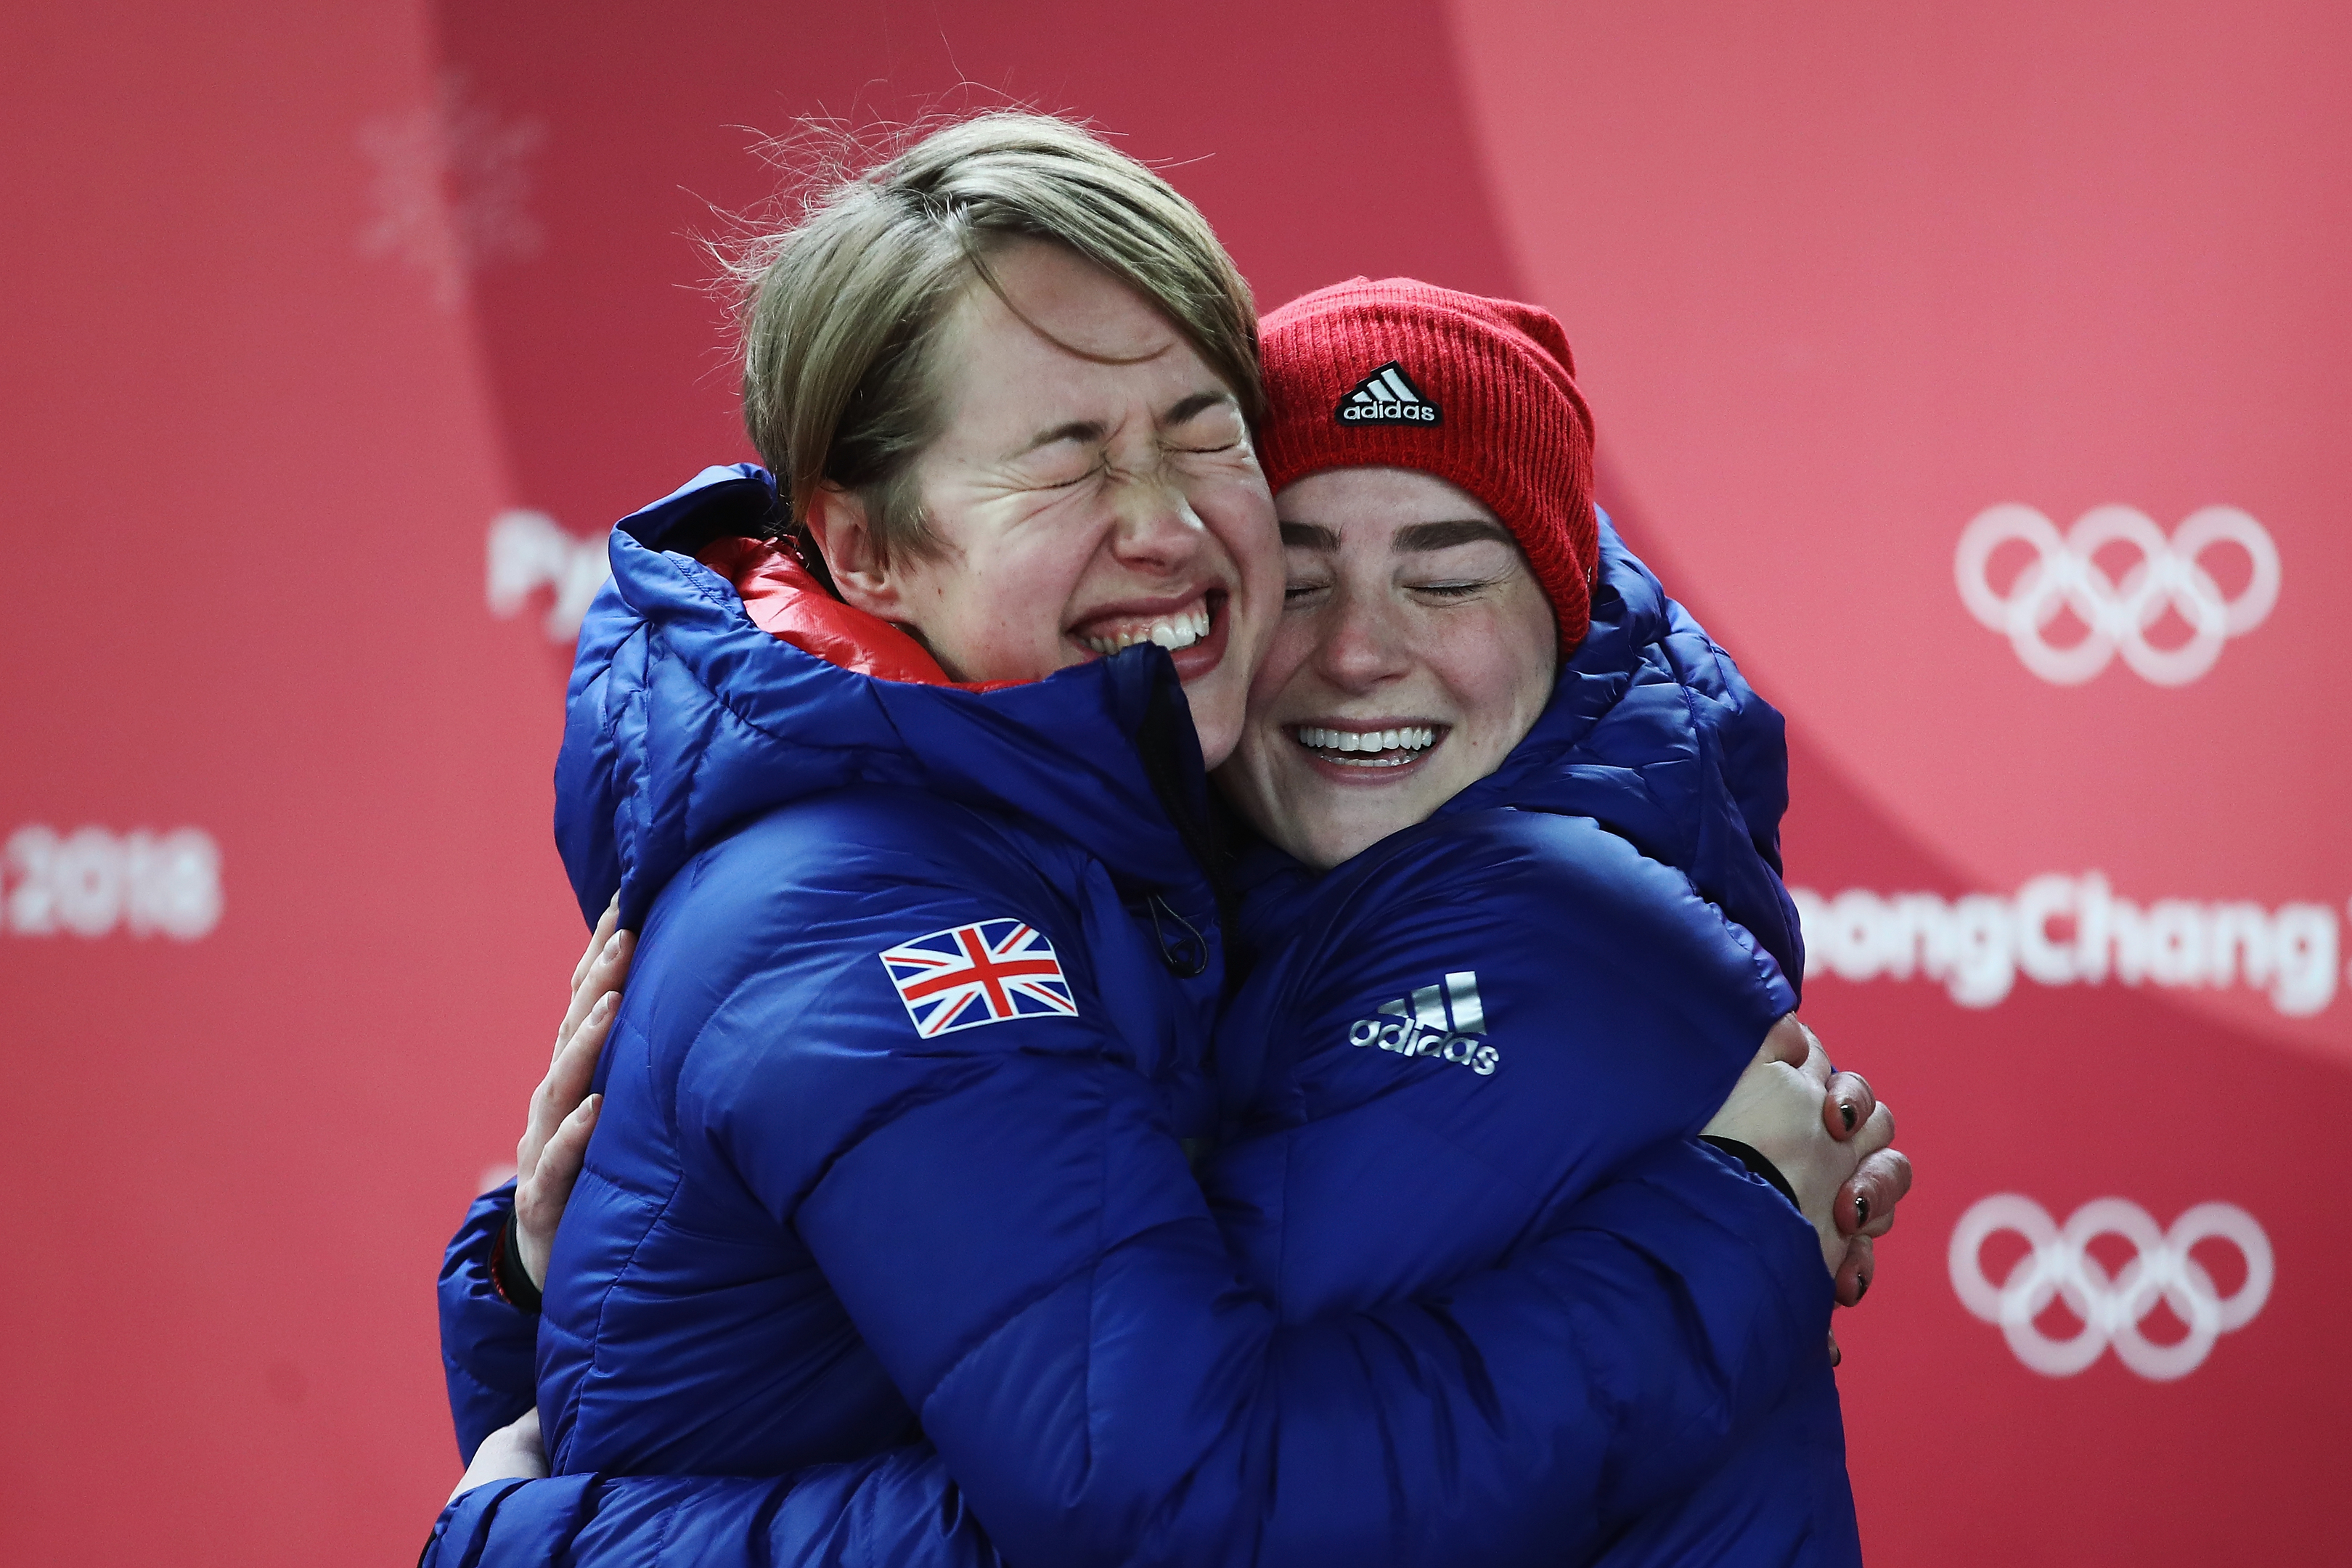 Gold medal winner Lizzy Yarnold of Great Britain and bronze medalist Laura Deas of Great Britain celebrate following the Women's Skeleton on day eight of the PyeongChang 2018 Winter Olympic Games at Olympic Sliding Centre (Clive Mason/Getty Images)